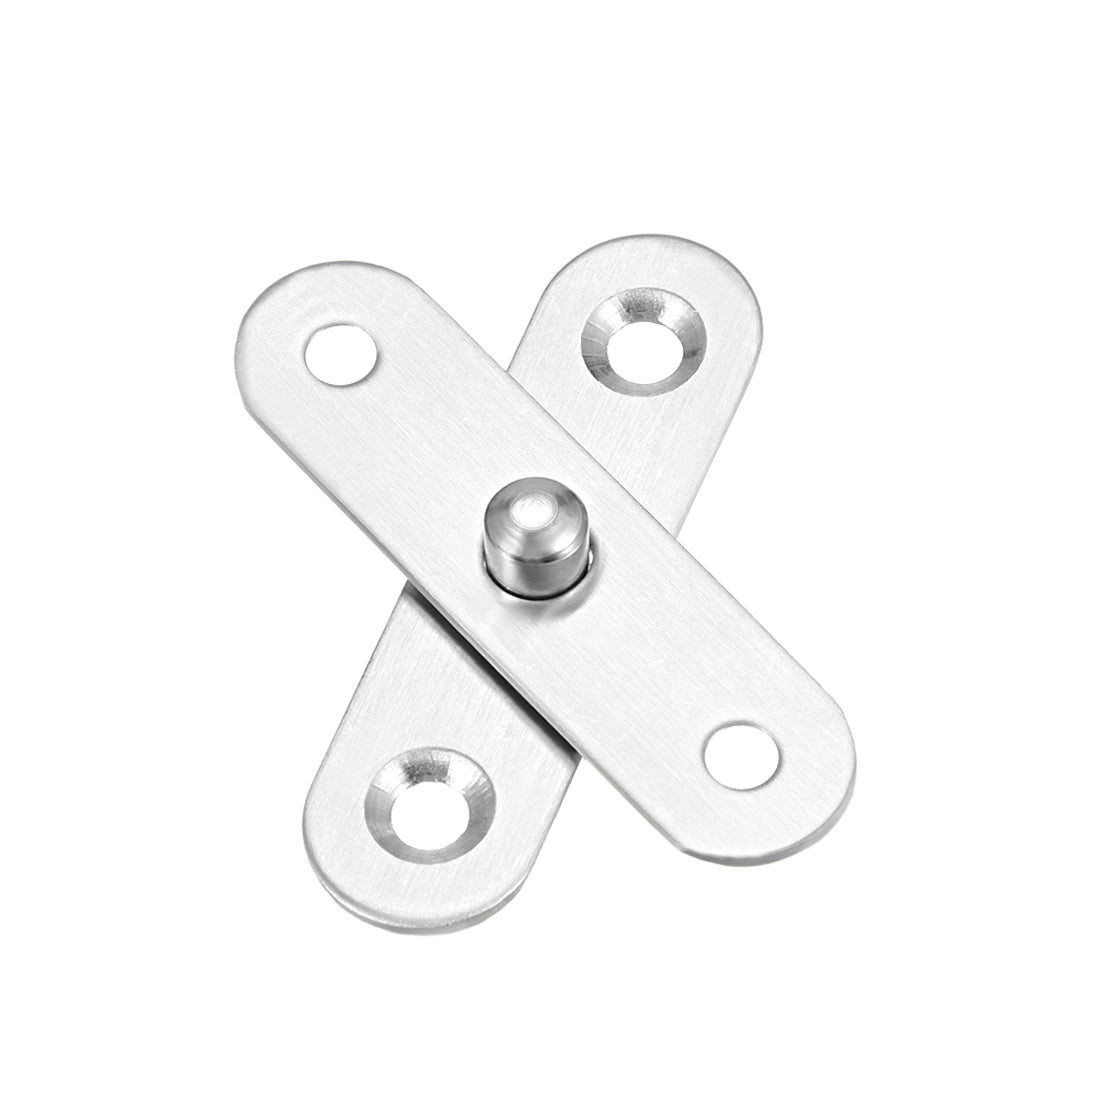 uxcell Uxcell 8 Sets Stainless Steel 360 Degree Rotating Door Pivot Hinge 57mm x 16mm